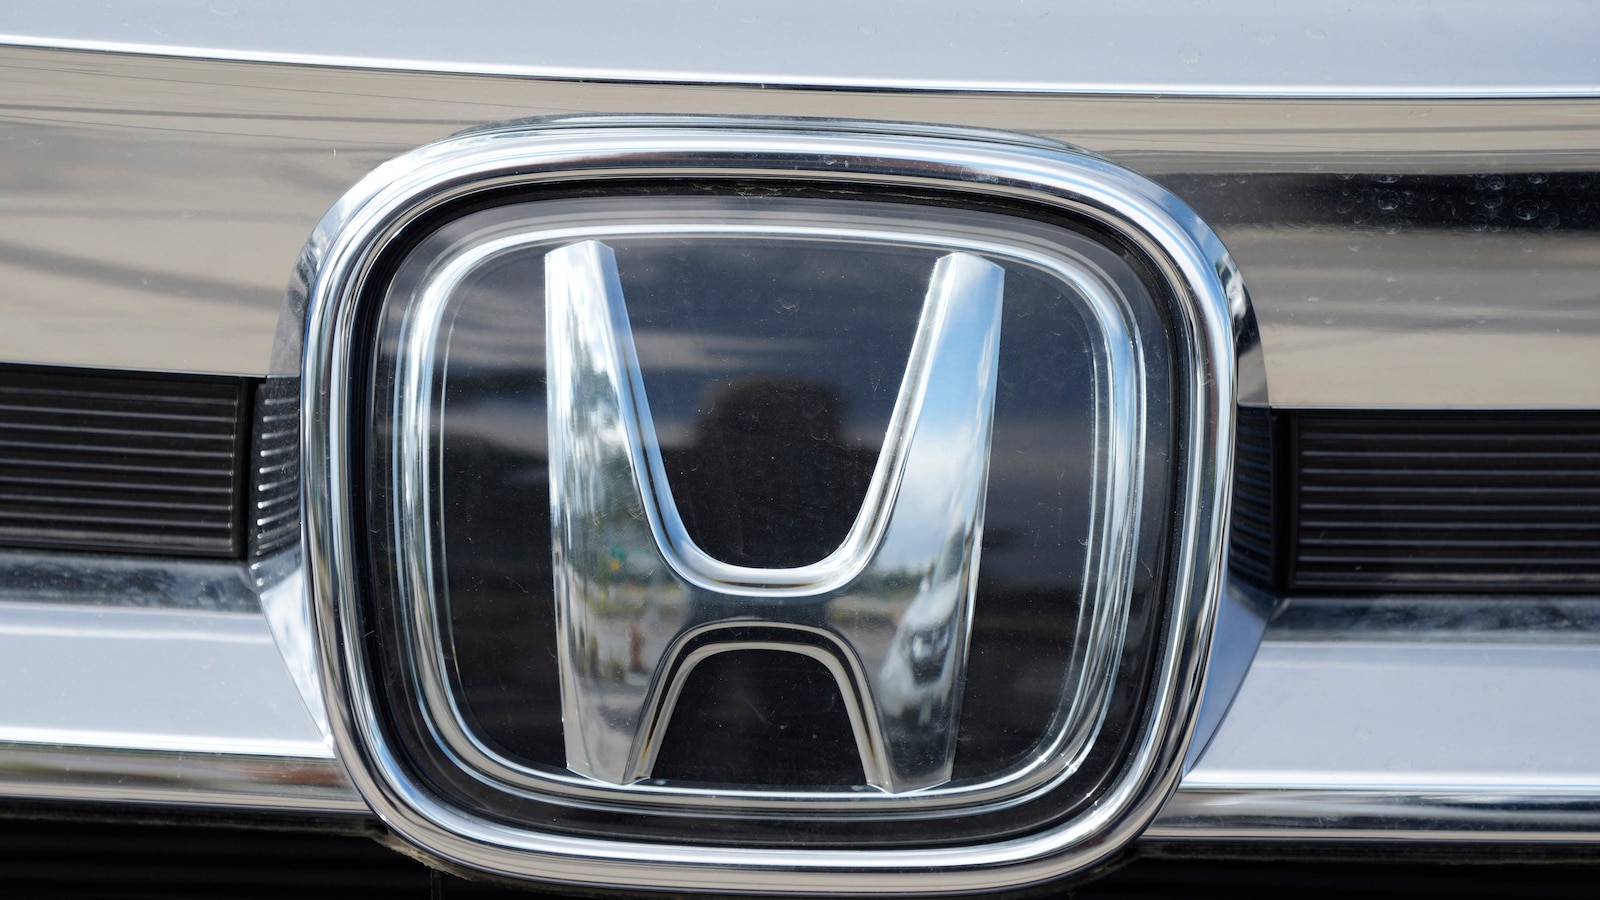 Honda issues recall for over 750K vehicles due to defective passenger seat air bag sensor